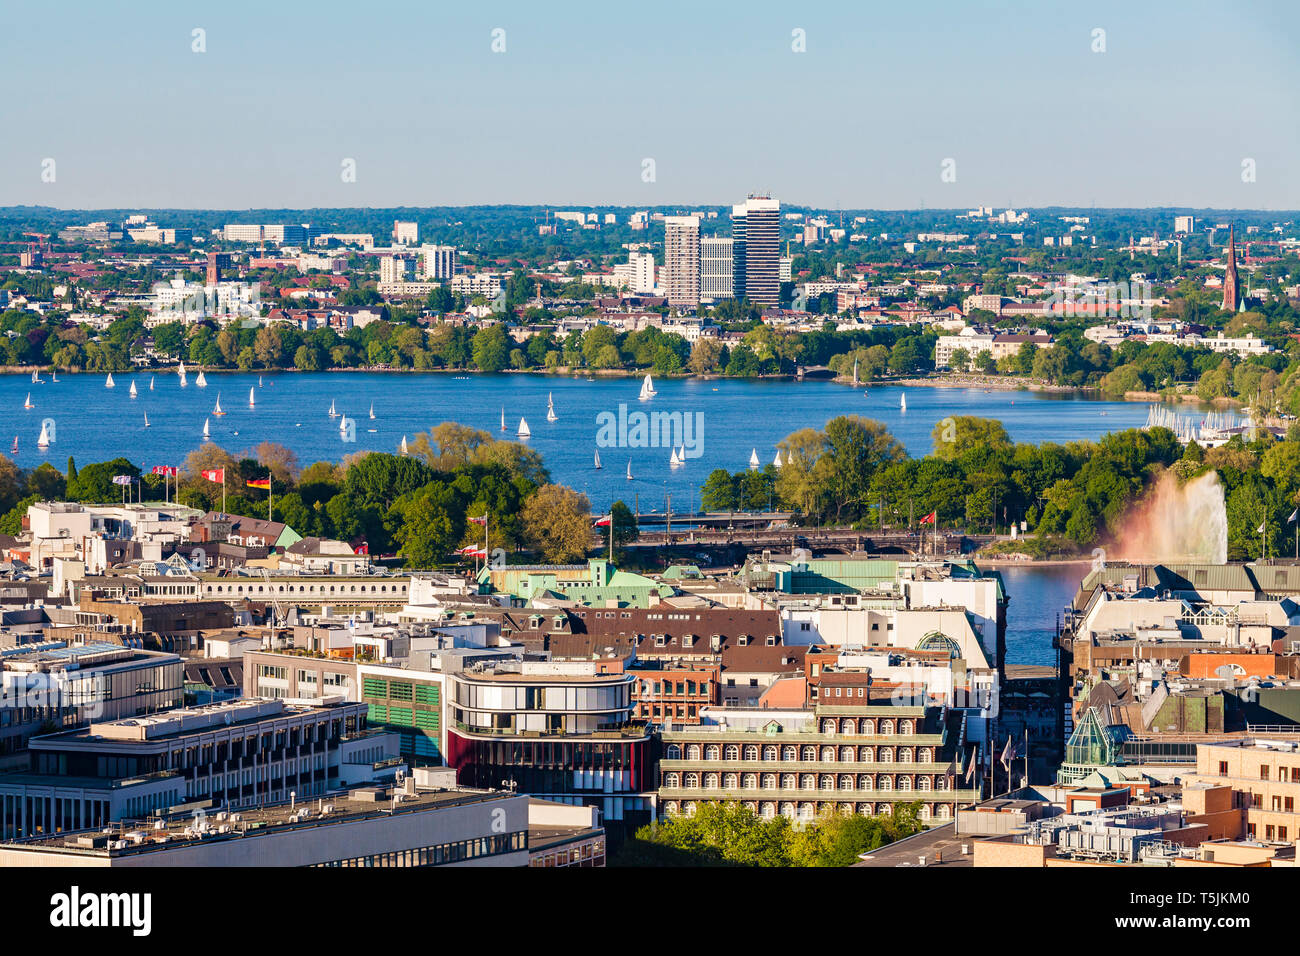 Germany, Hamburg, View of Neustadt with sailing boats on Binnenalster Stock Photo